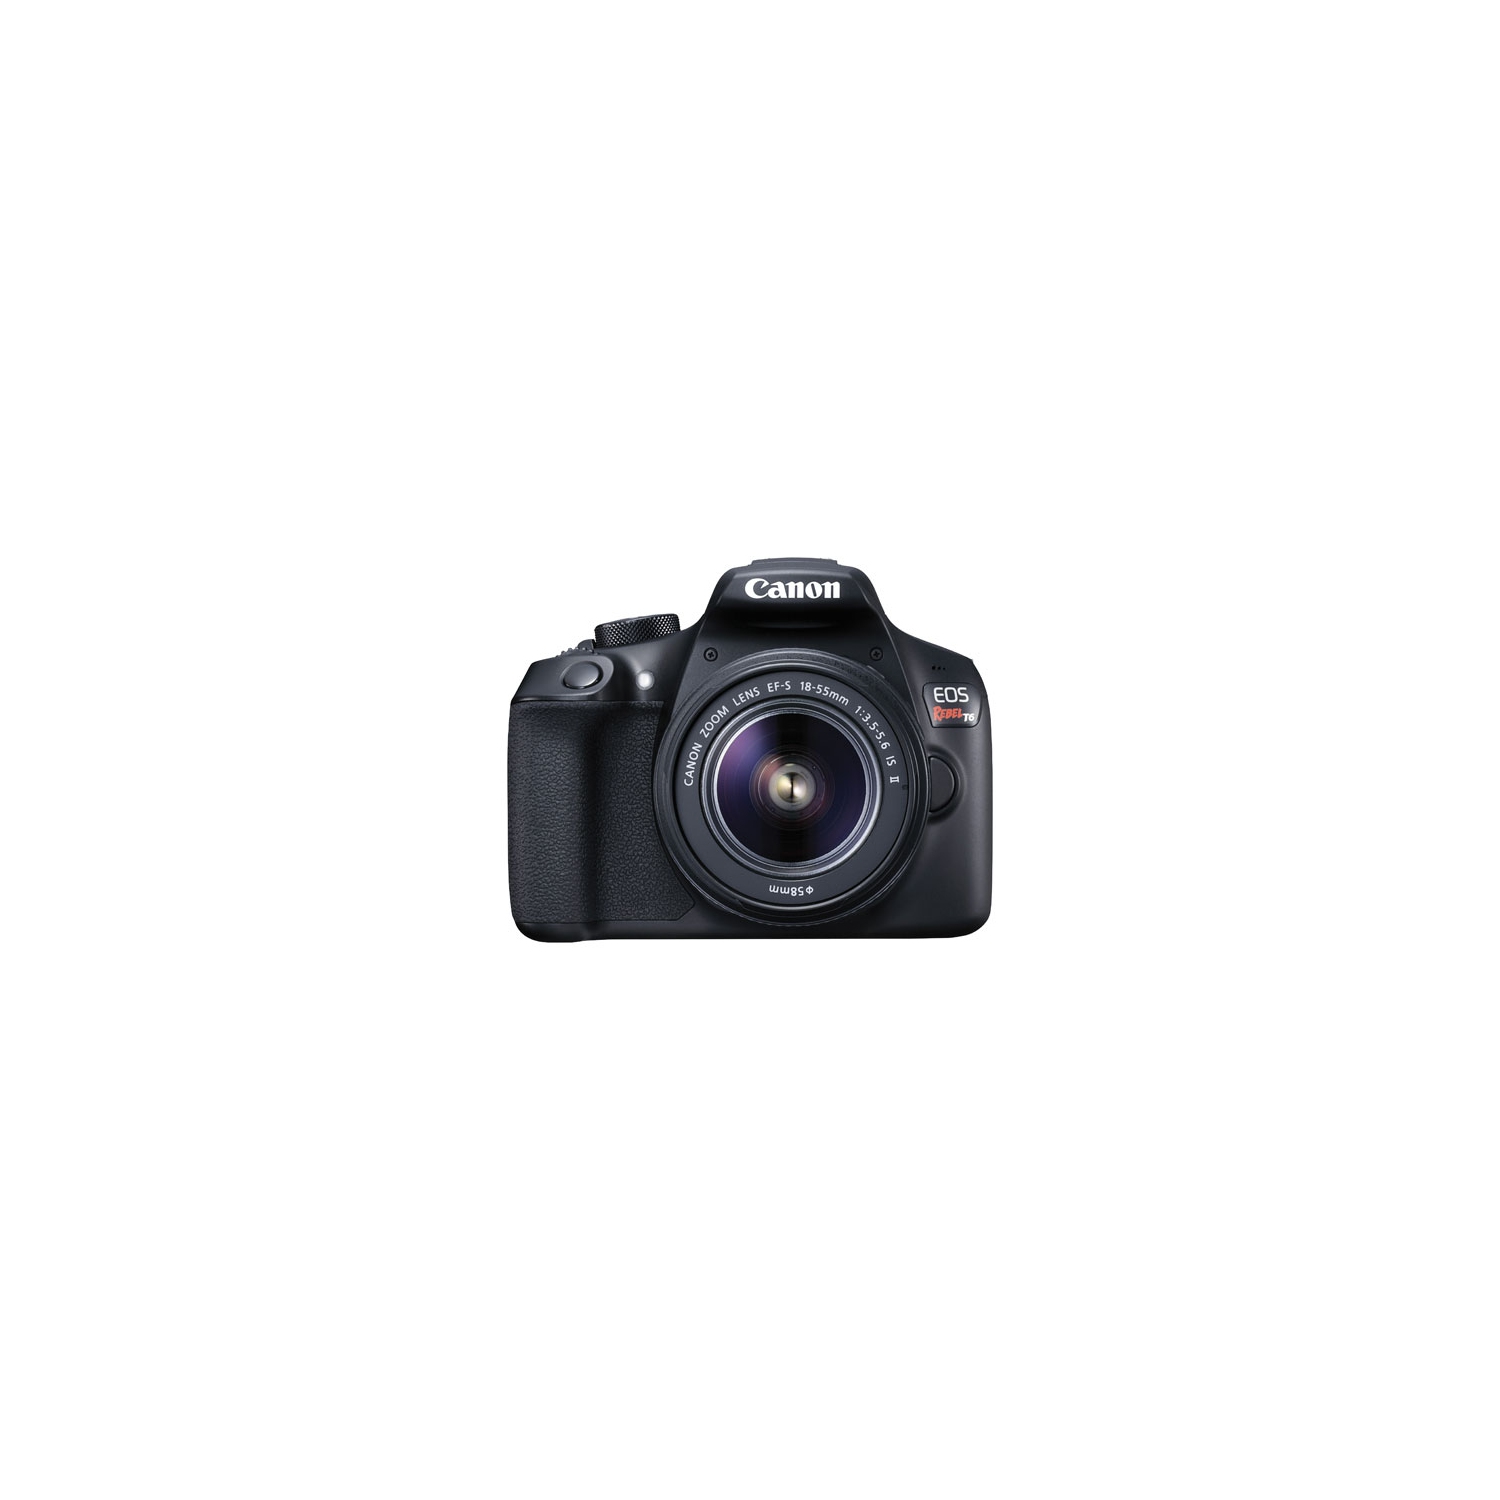 Refurbished (Fair) - Canon EOS Rebel T6 DSLR Camera with EF-S 18-55mm f/3.5-5.6 IS II Lens Kit